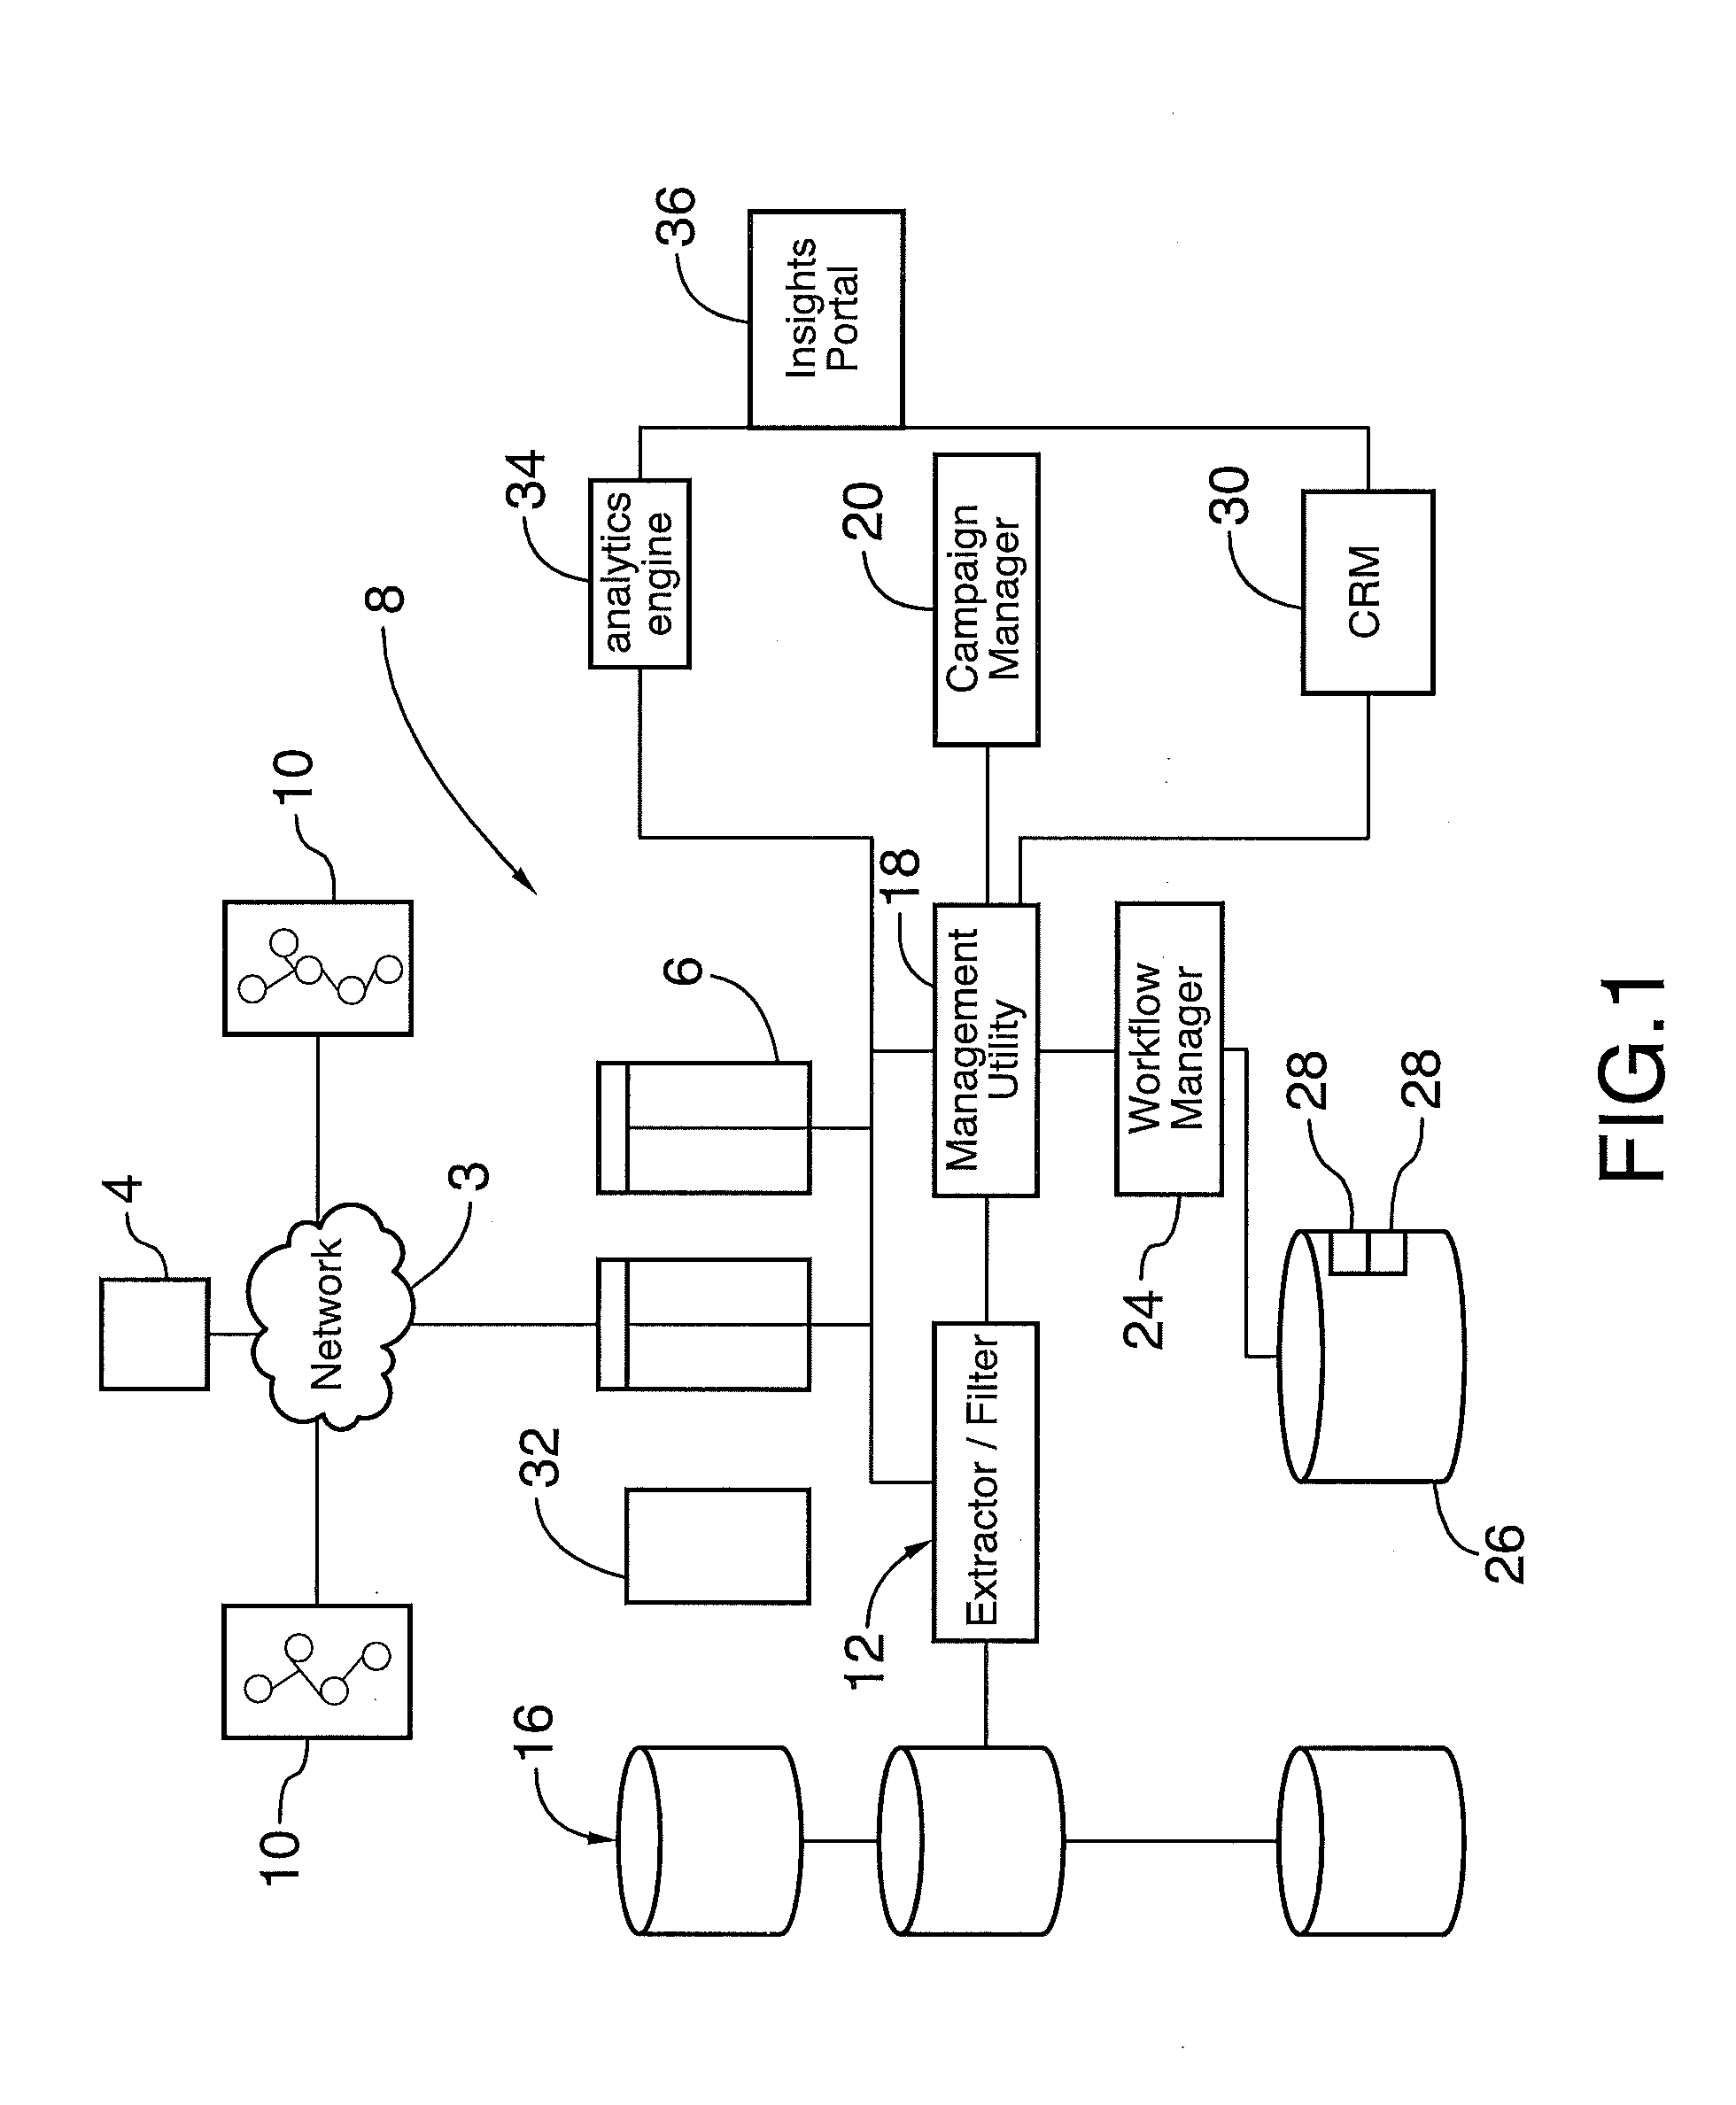 System and method for managing targeted social communications